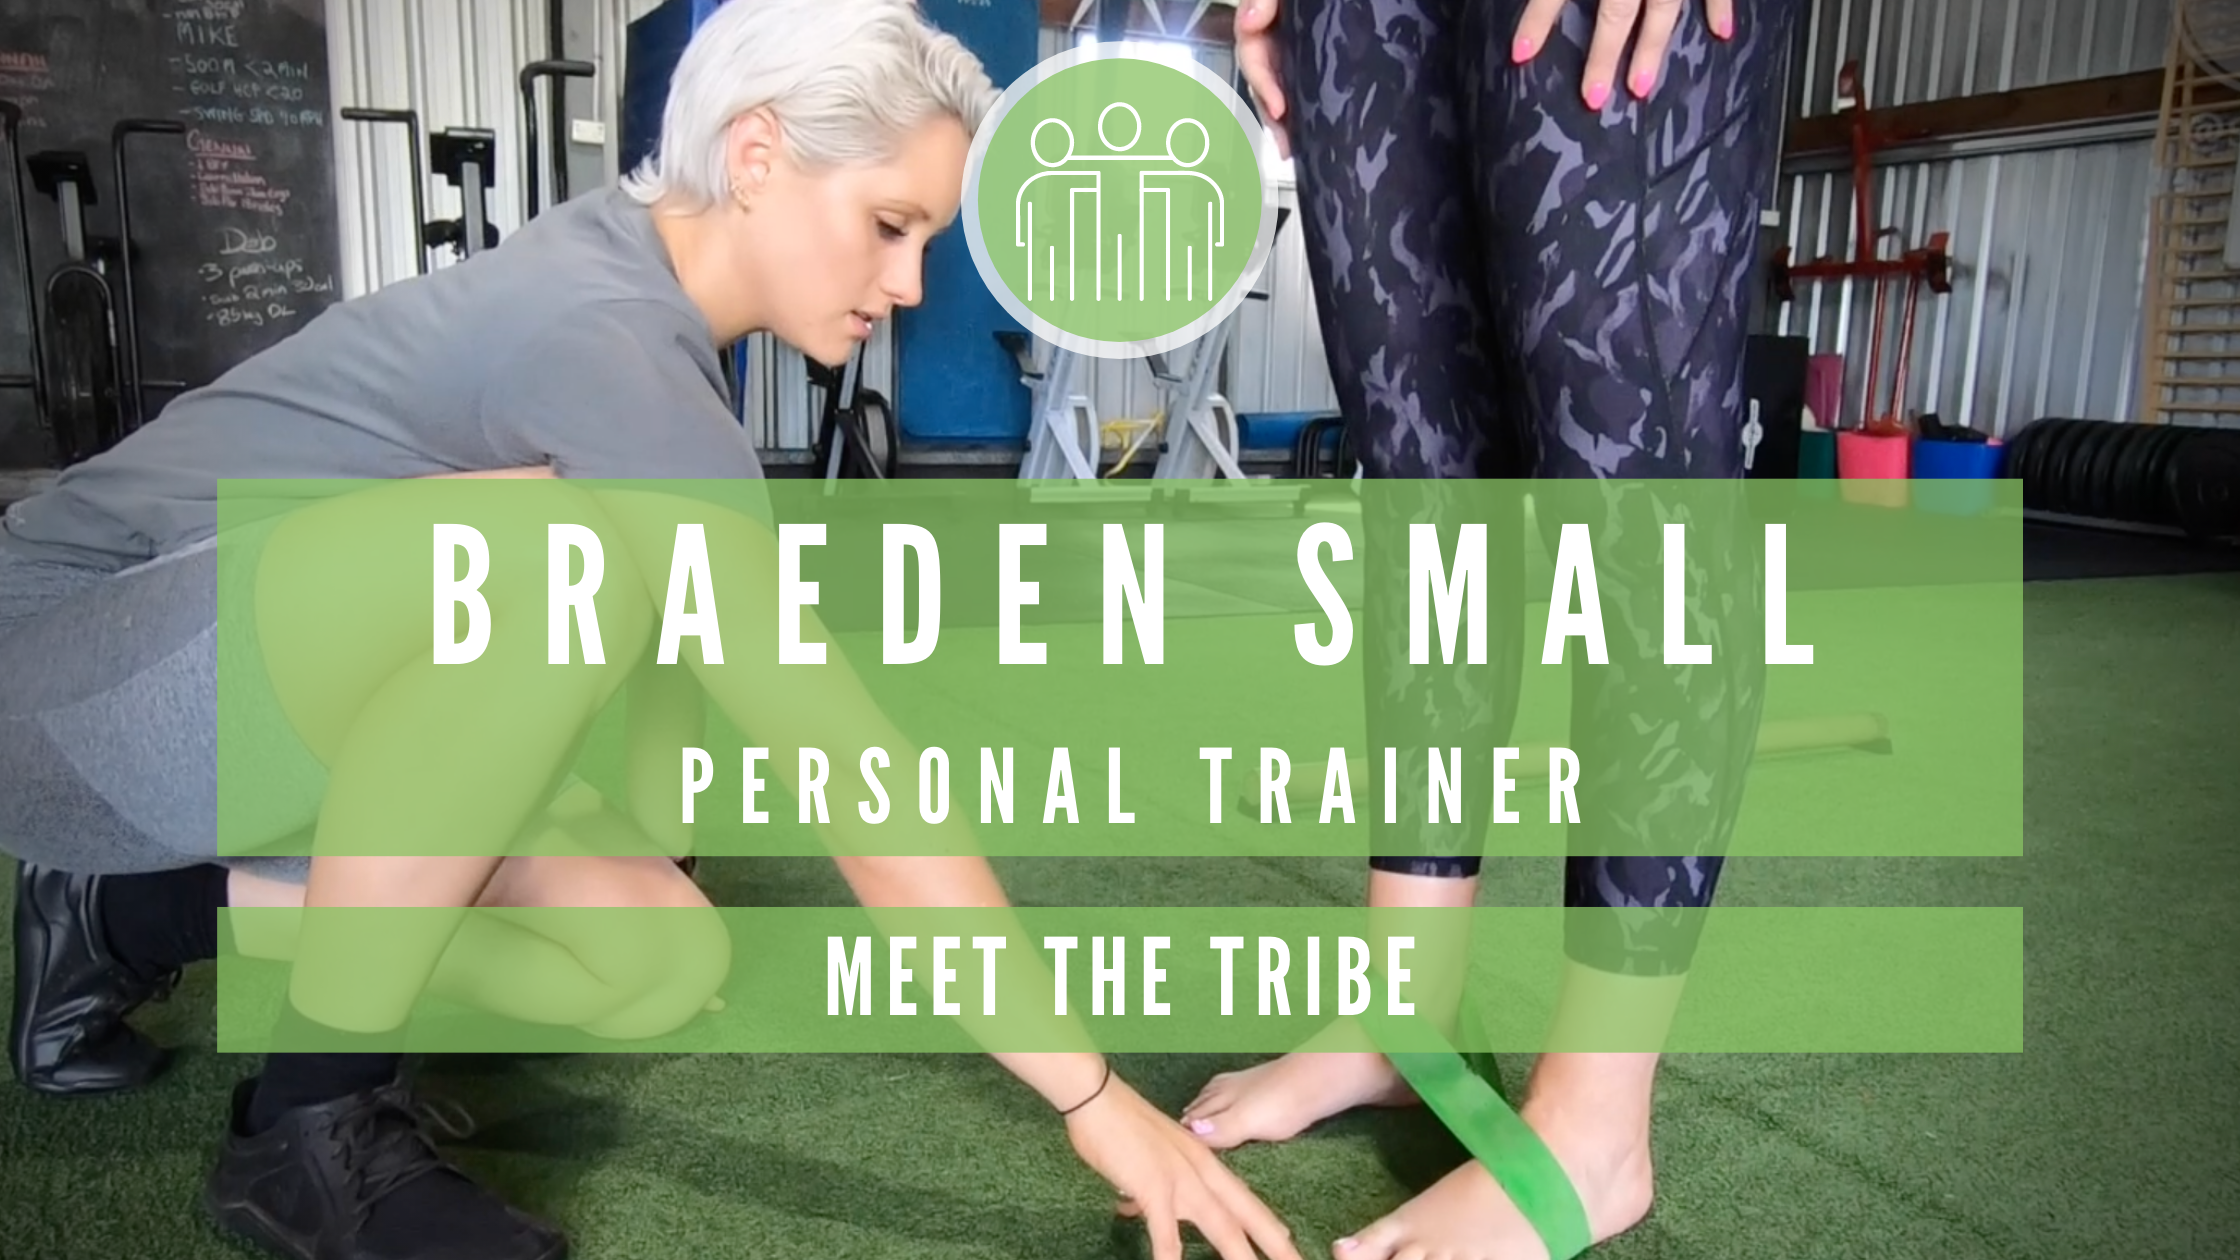 Meet The Tribe | Braeden Small